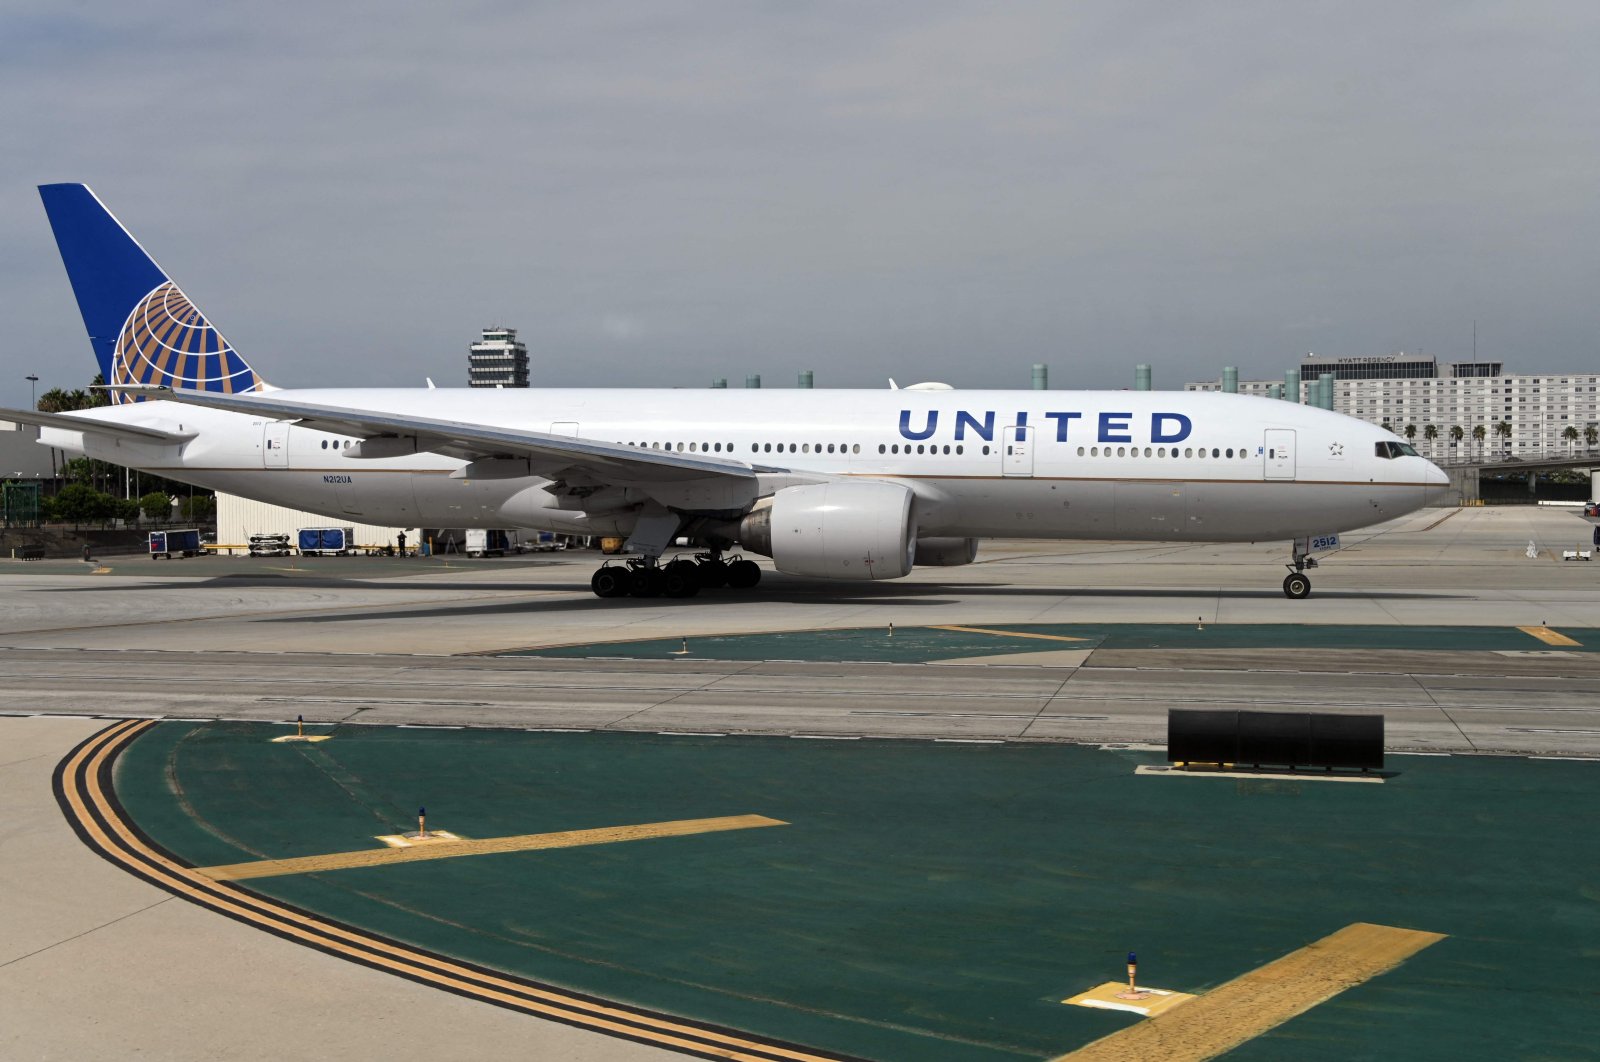 A United Airlines aircraft sits on the tarmac in this undated photo. (AFP Photo)